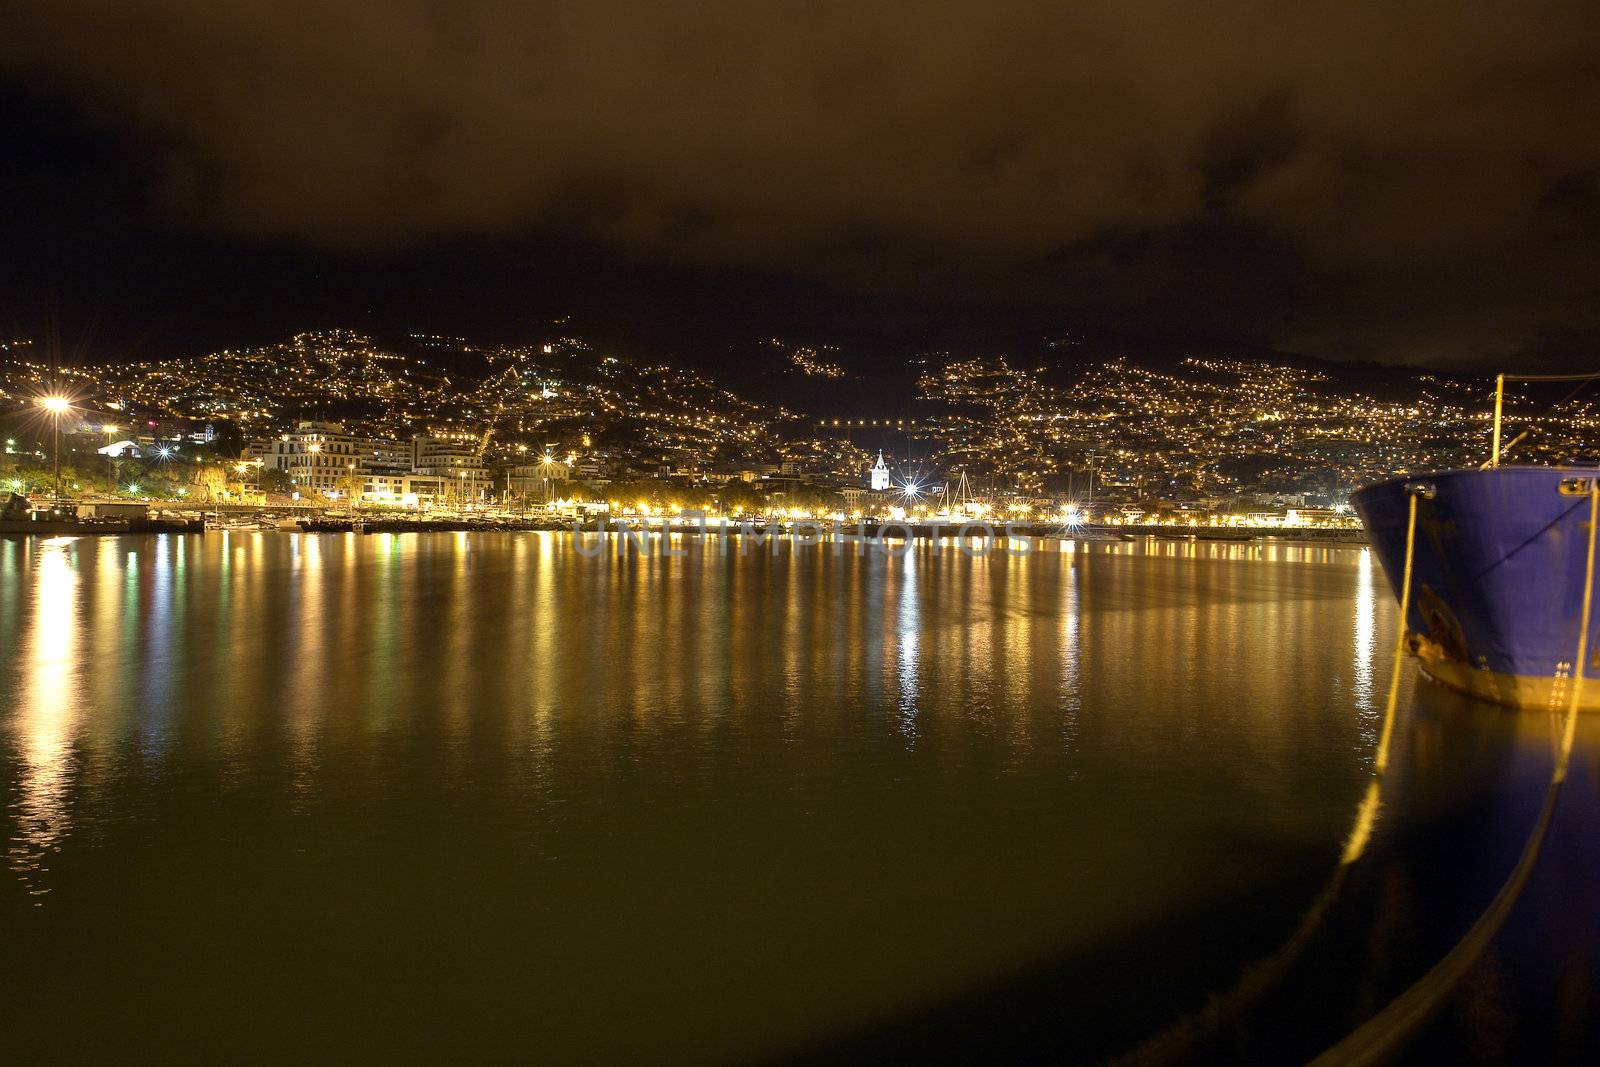 Night photo of a city by the sea in Funchal